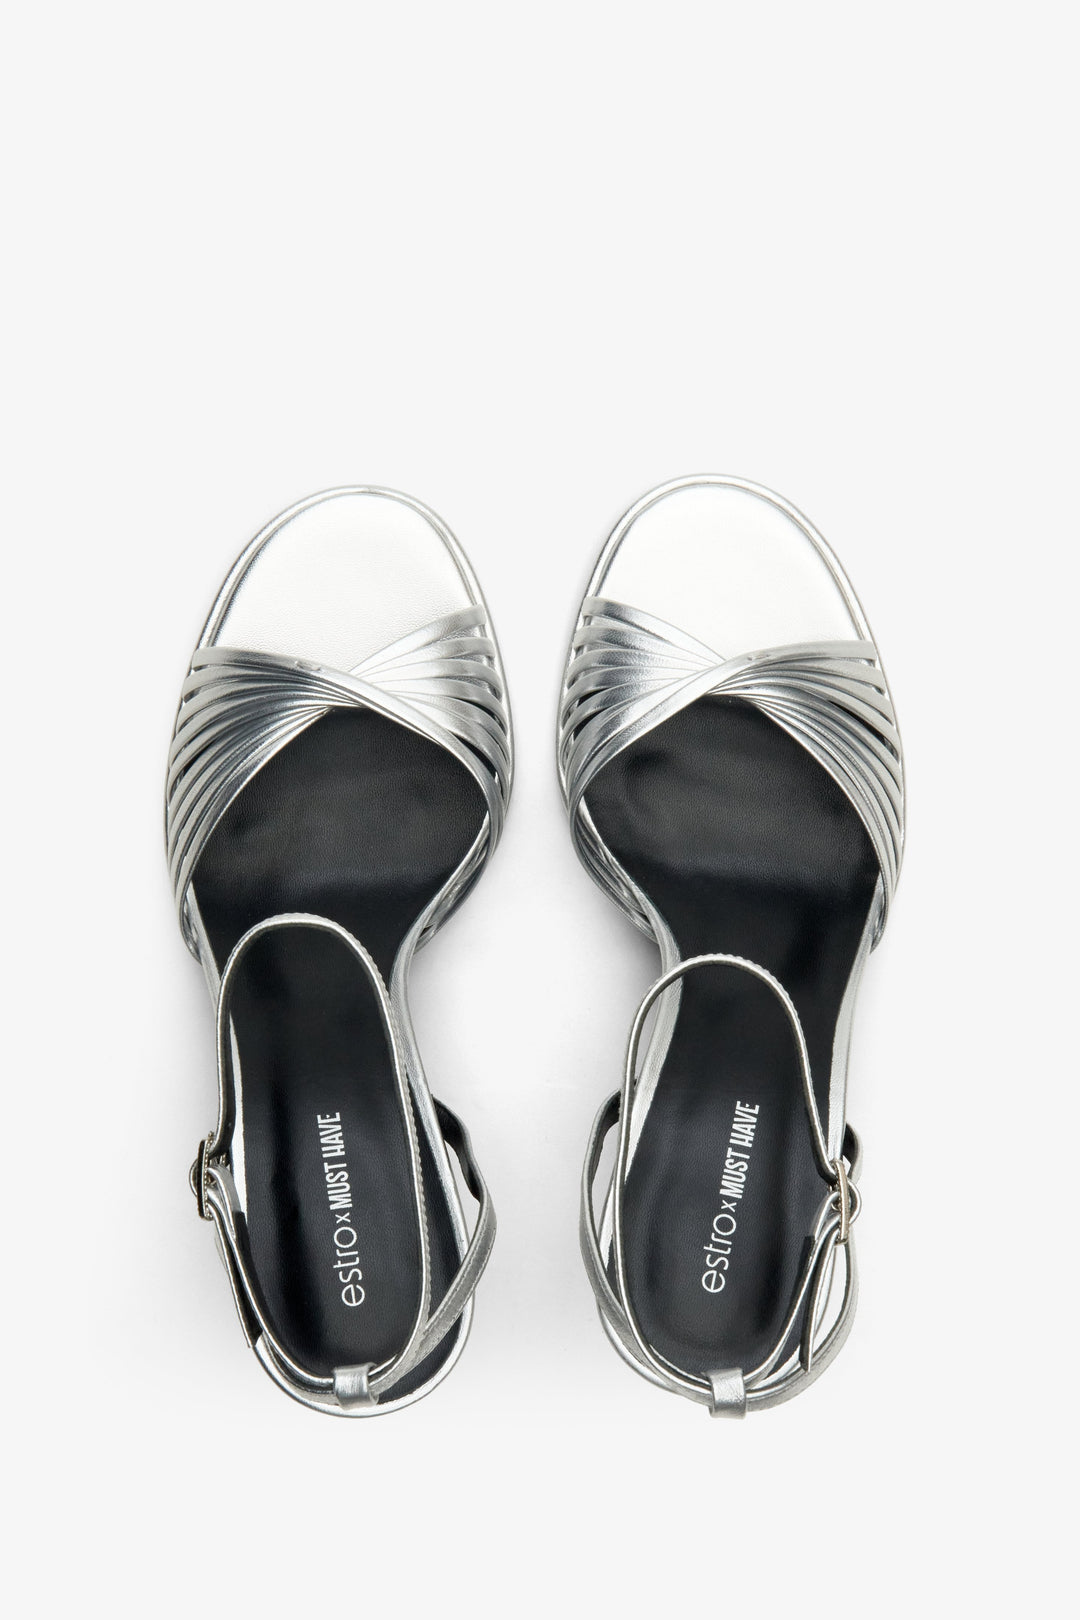 Estro x MustHave silver leather women's sandals made of genuine leather - top view presentation of the footwear.